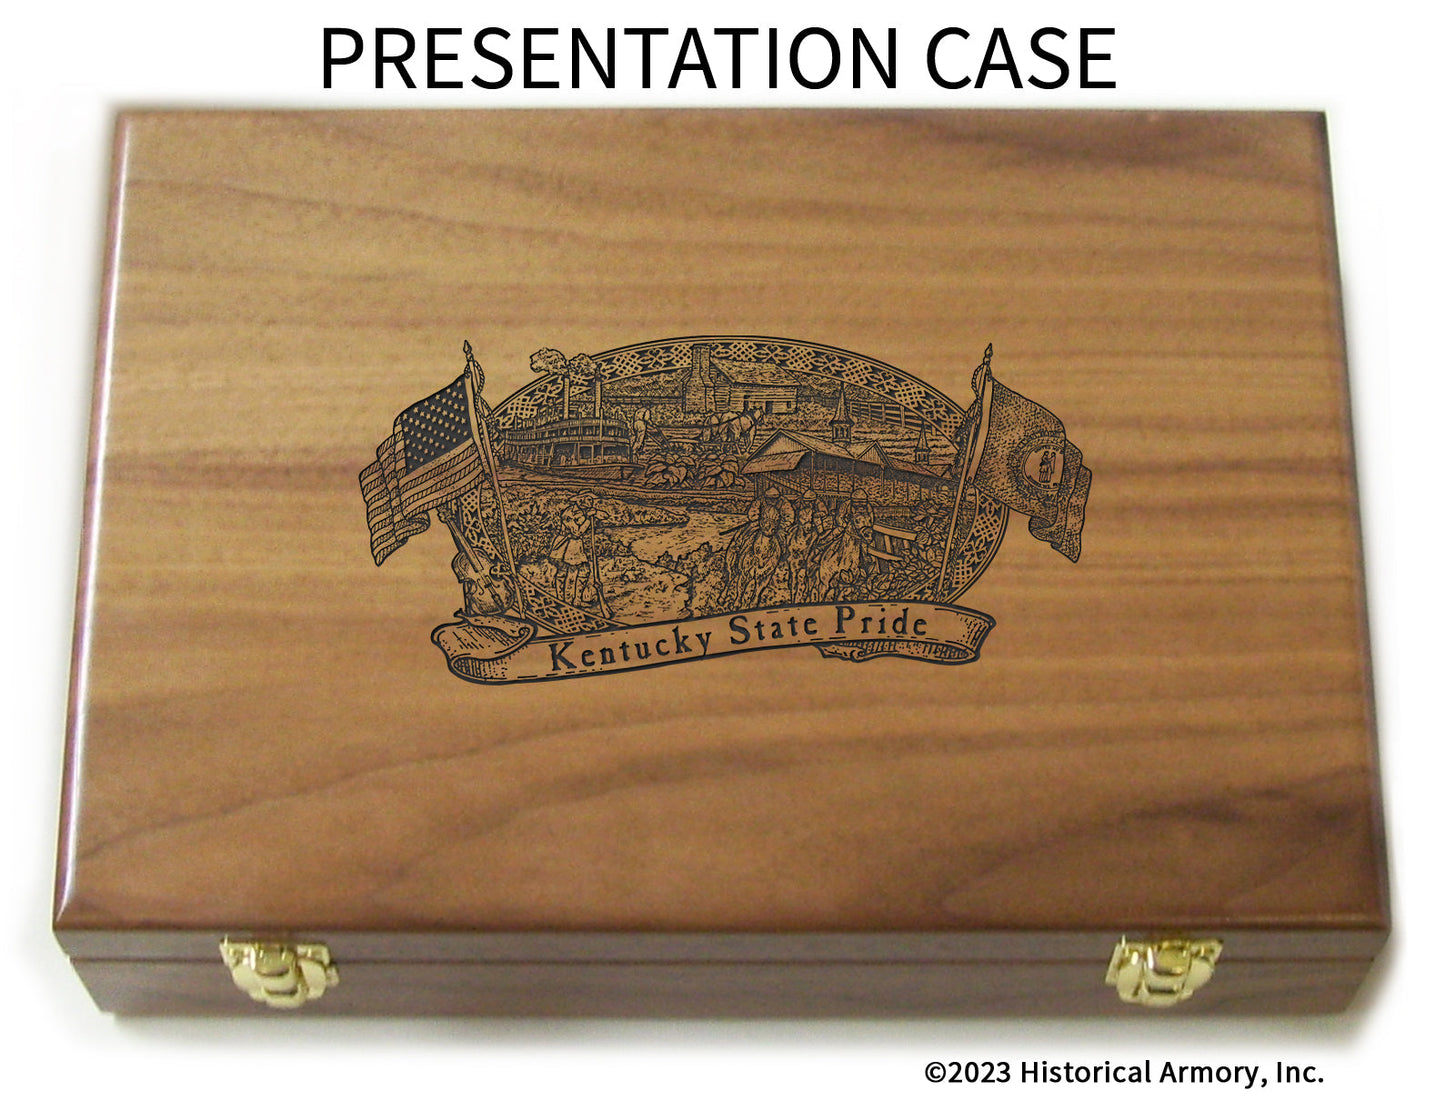 Kentucky State Pride Limited Edition Engraved 1911 Presentation Case